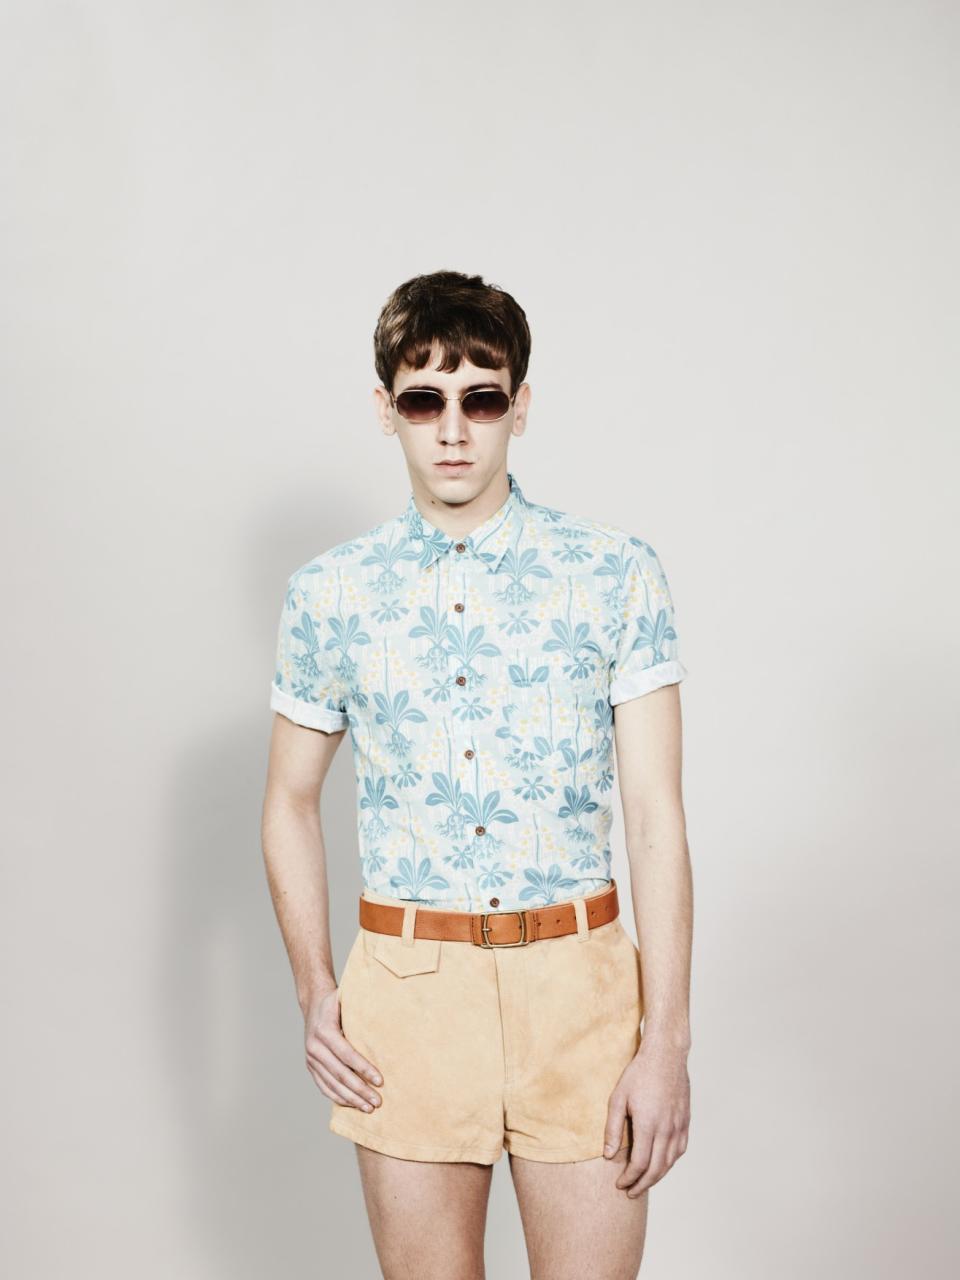 Pieces from the Topman Spring/Summer collection